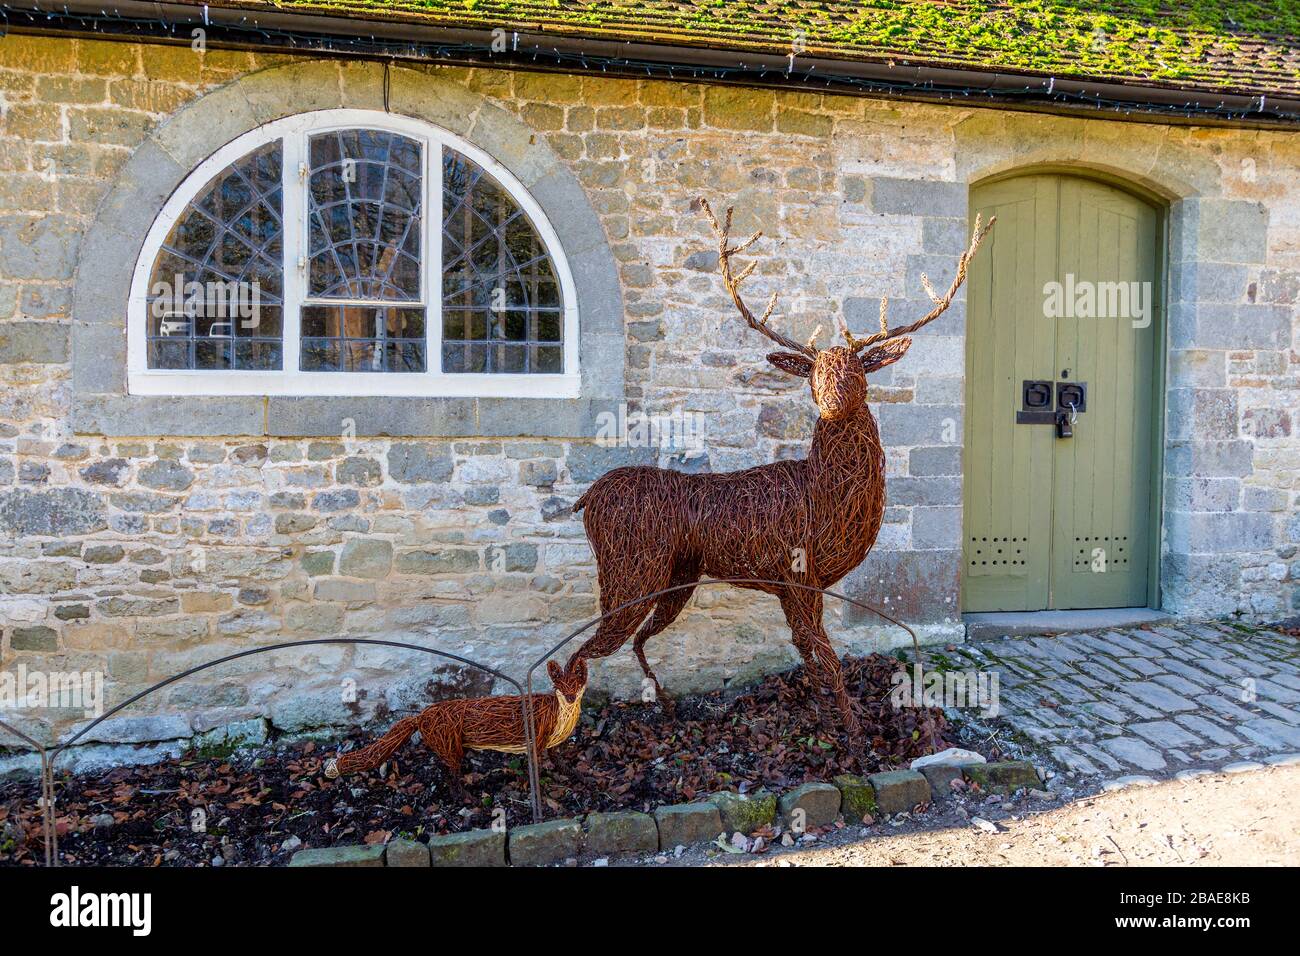 Realistic willow sculptures of a red deer stag and fox in the stable yard at Stourhead House; Wiltshire; England; UK Stock Photo